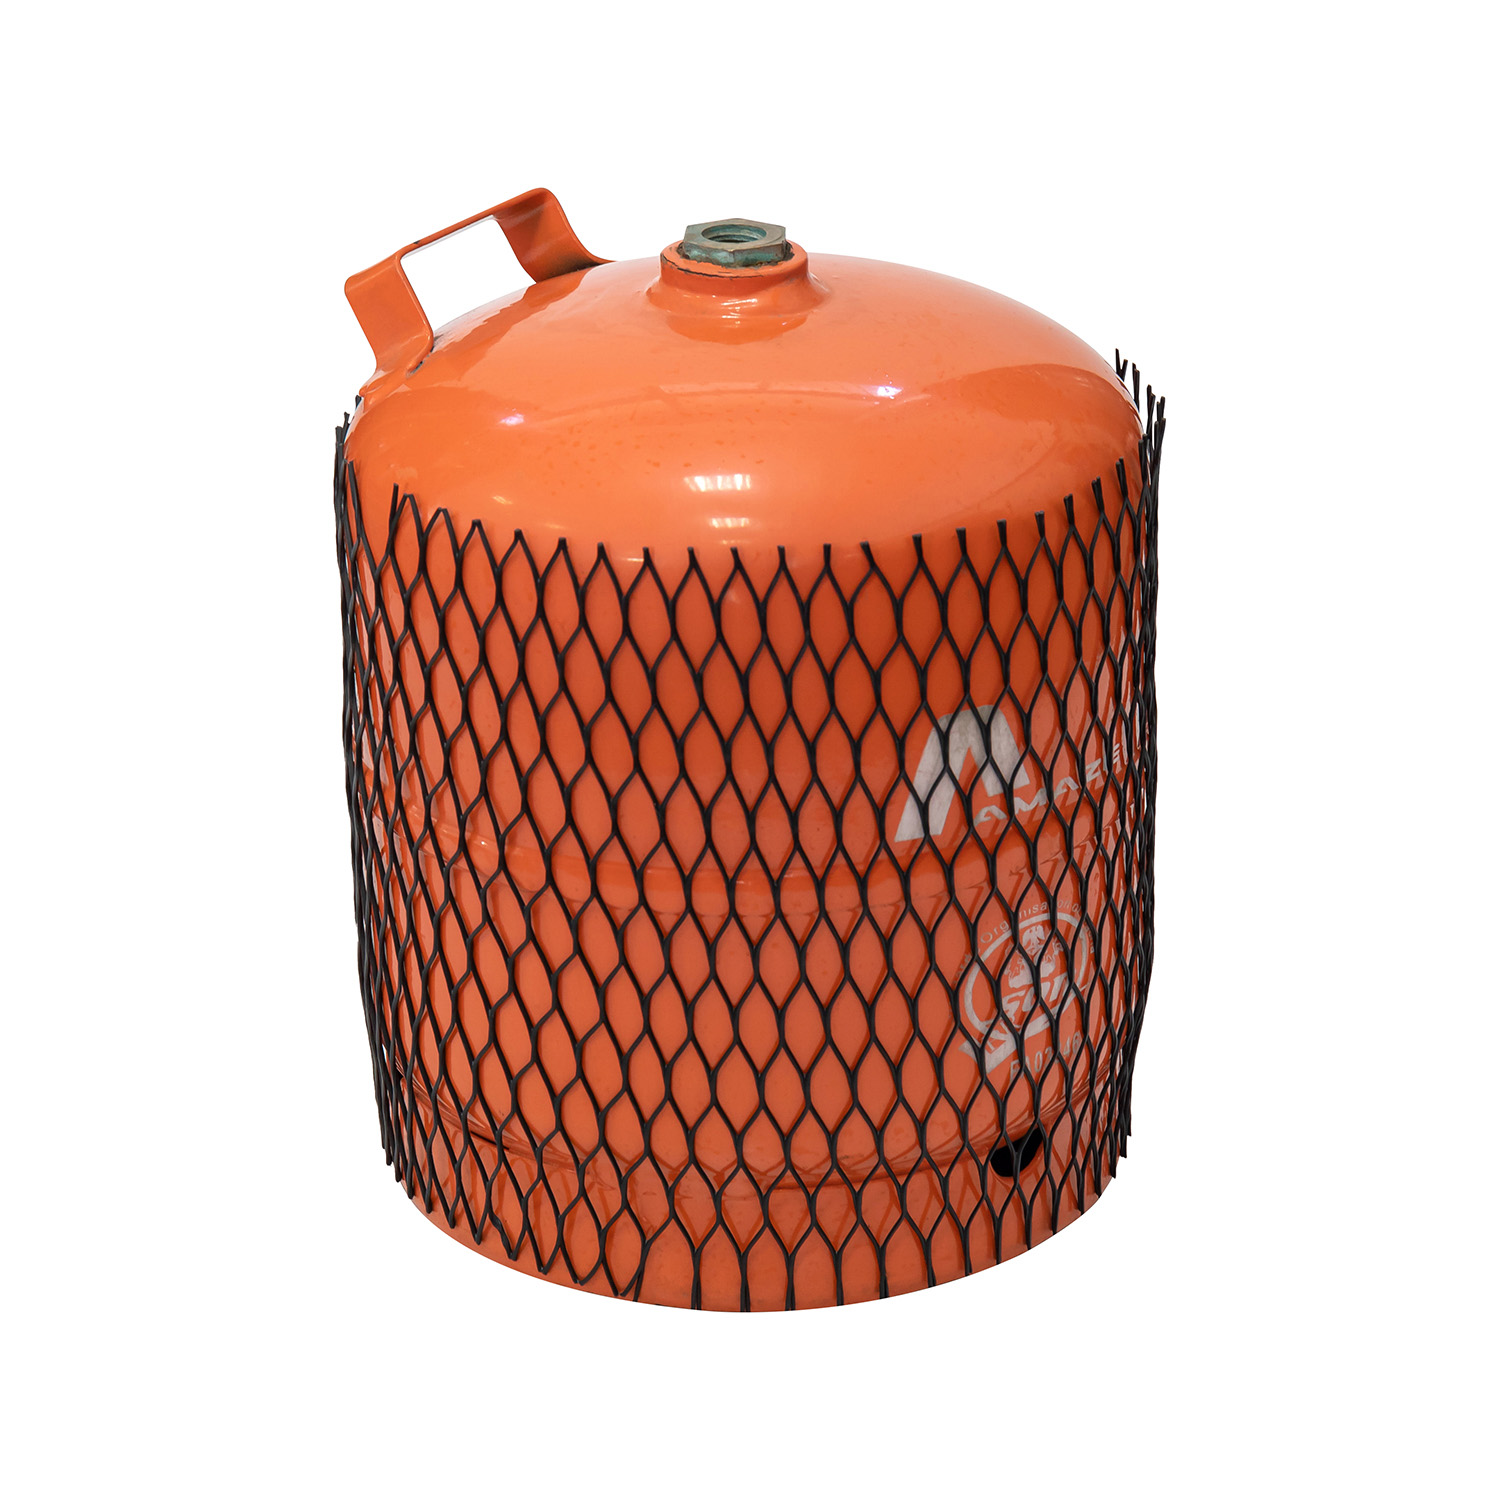 3kg Lpg Propane Gas Cylinder Tank Bottle for Camping Cooking